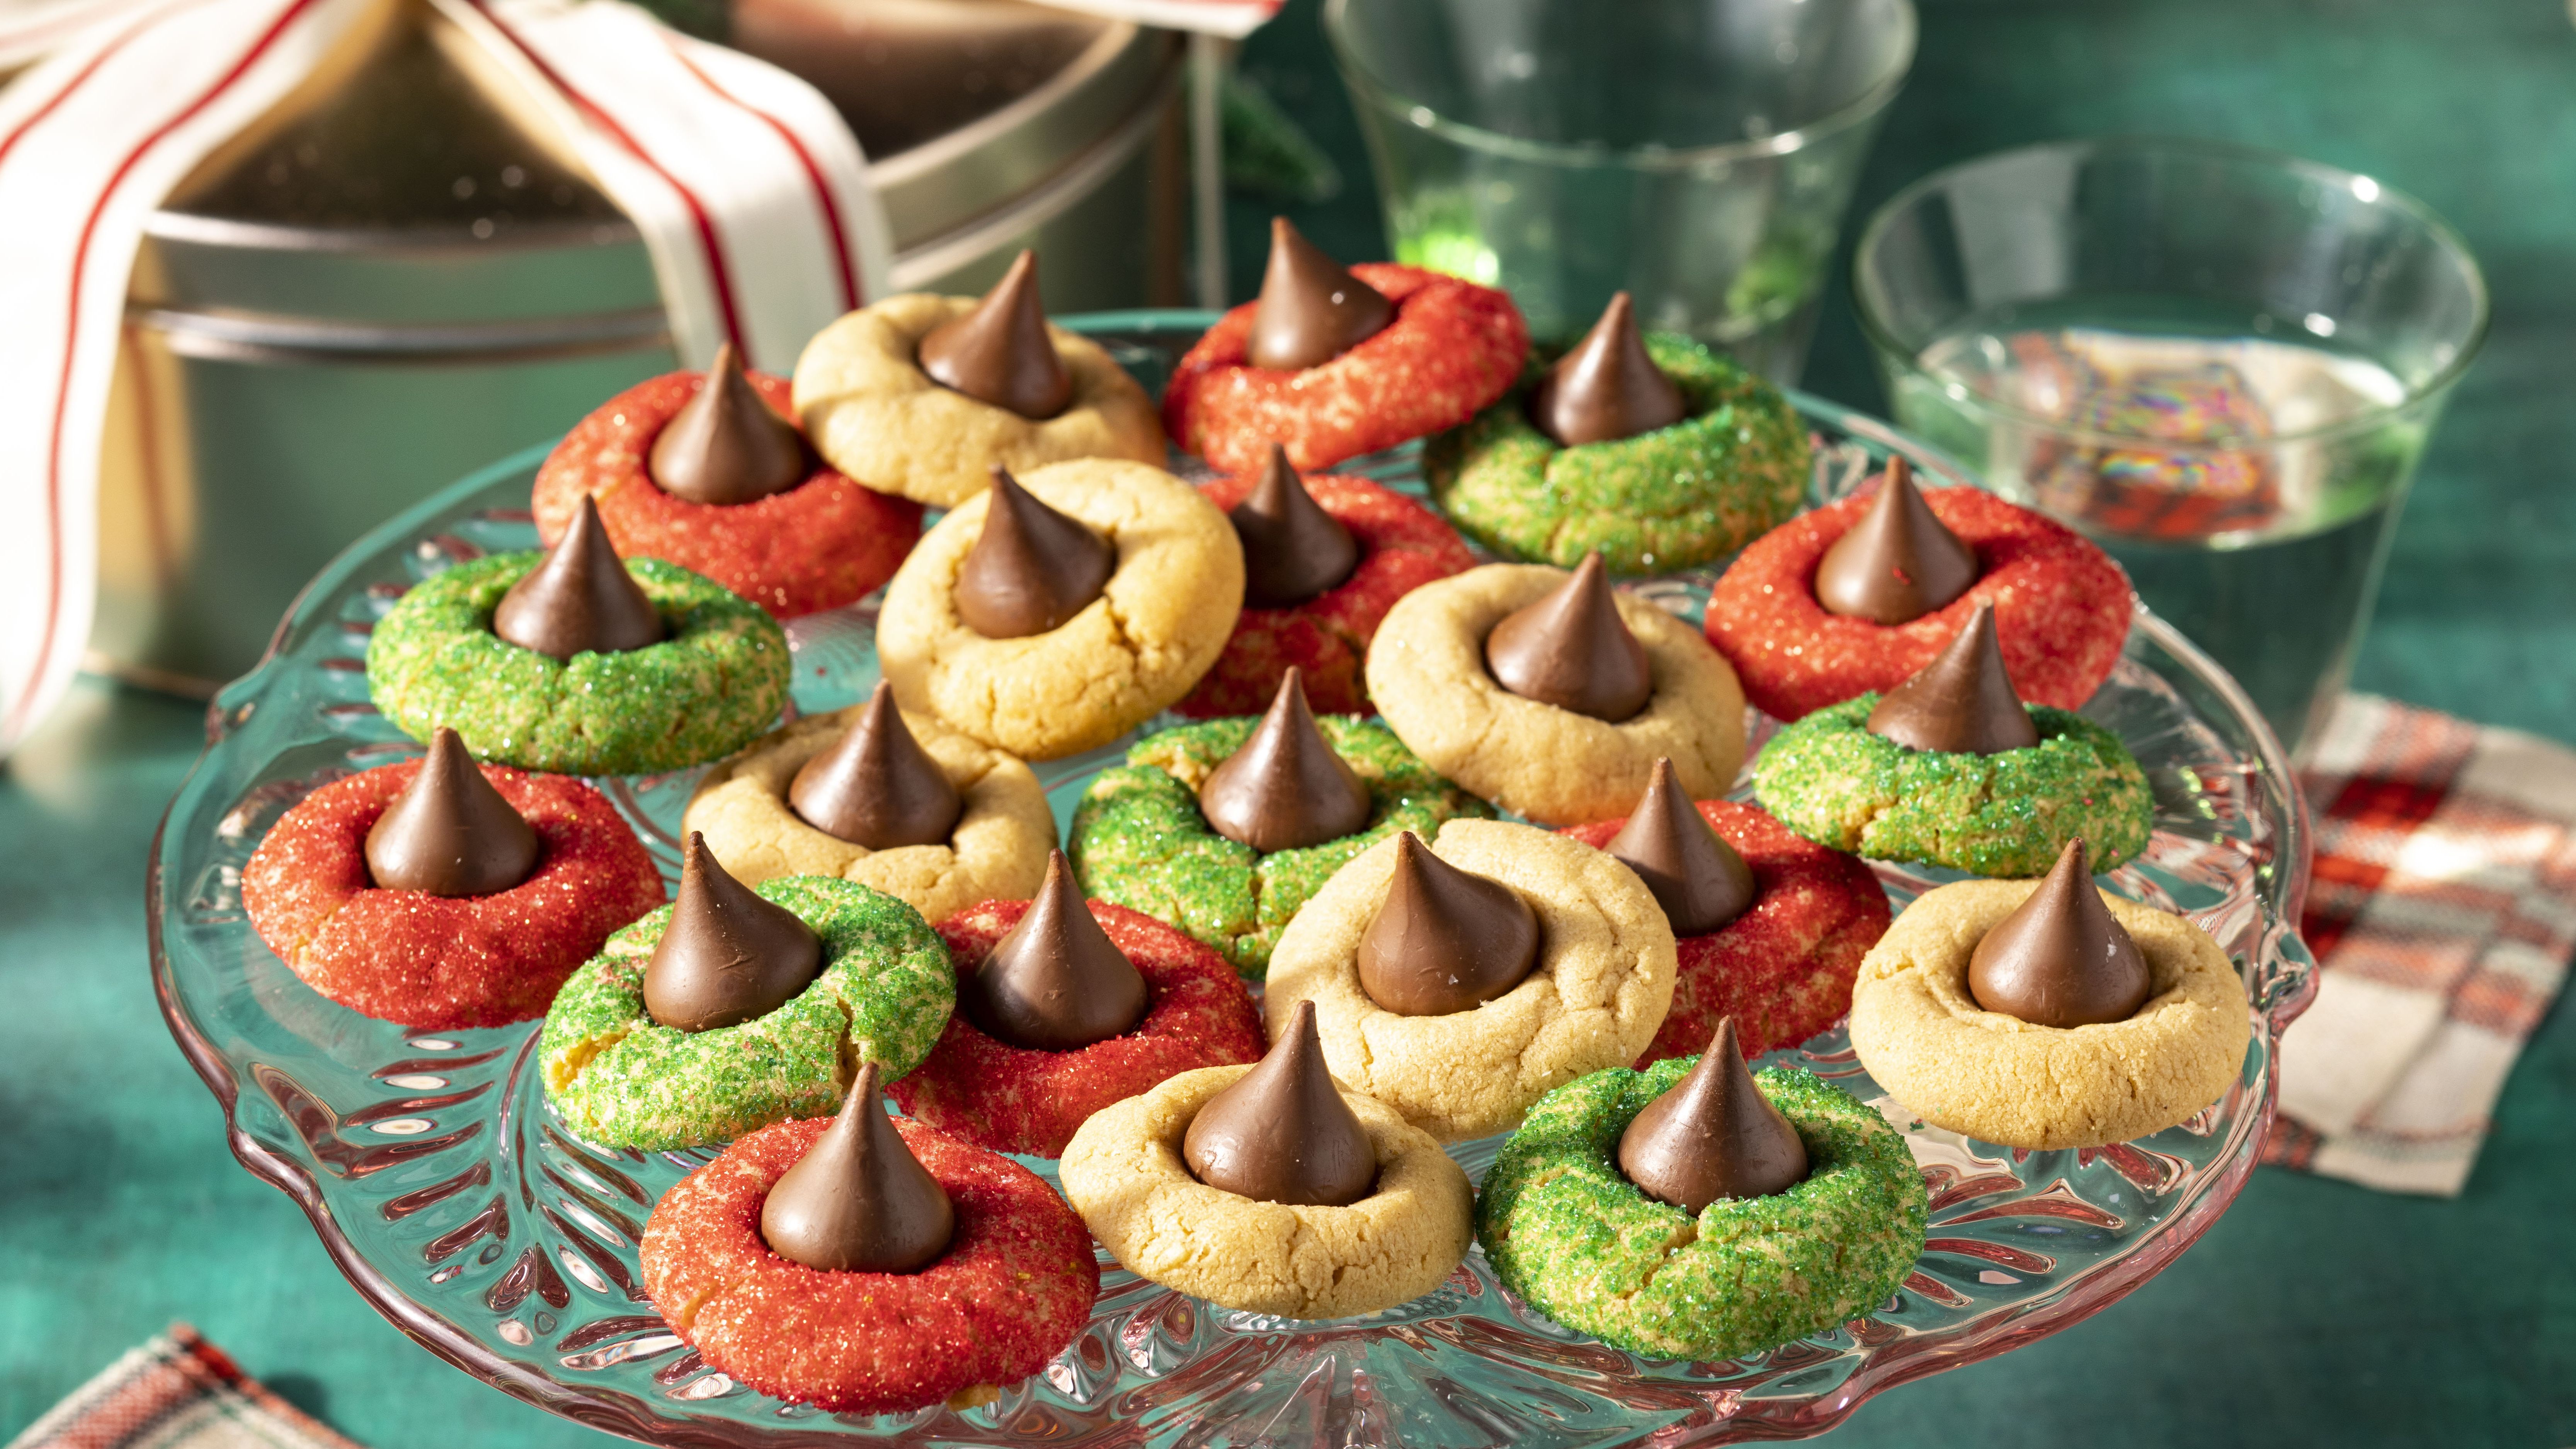 https://hips.hearstapps.com/hmg-prod/images/peanut-butter-blossoms-recipe-holiday-1637352683.jpg?crop=0.992xw:0.837xh;0,0.0697xh